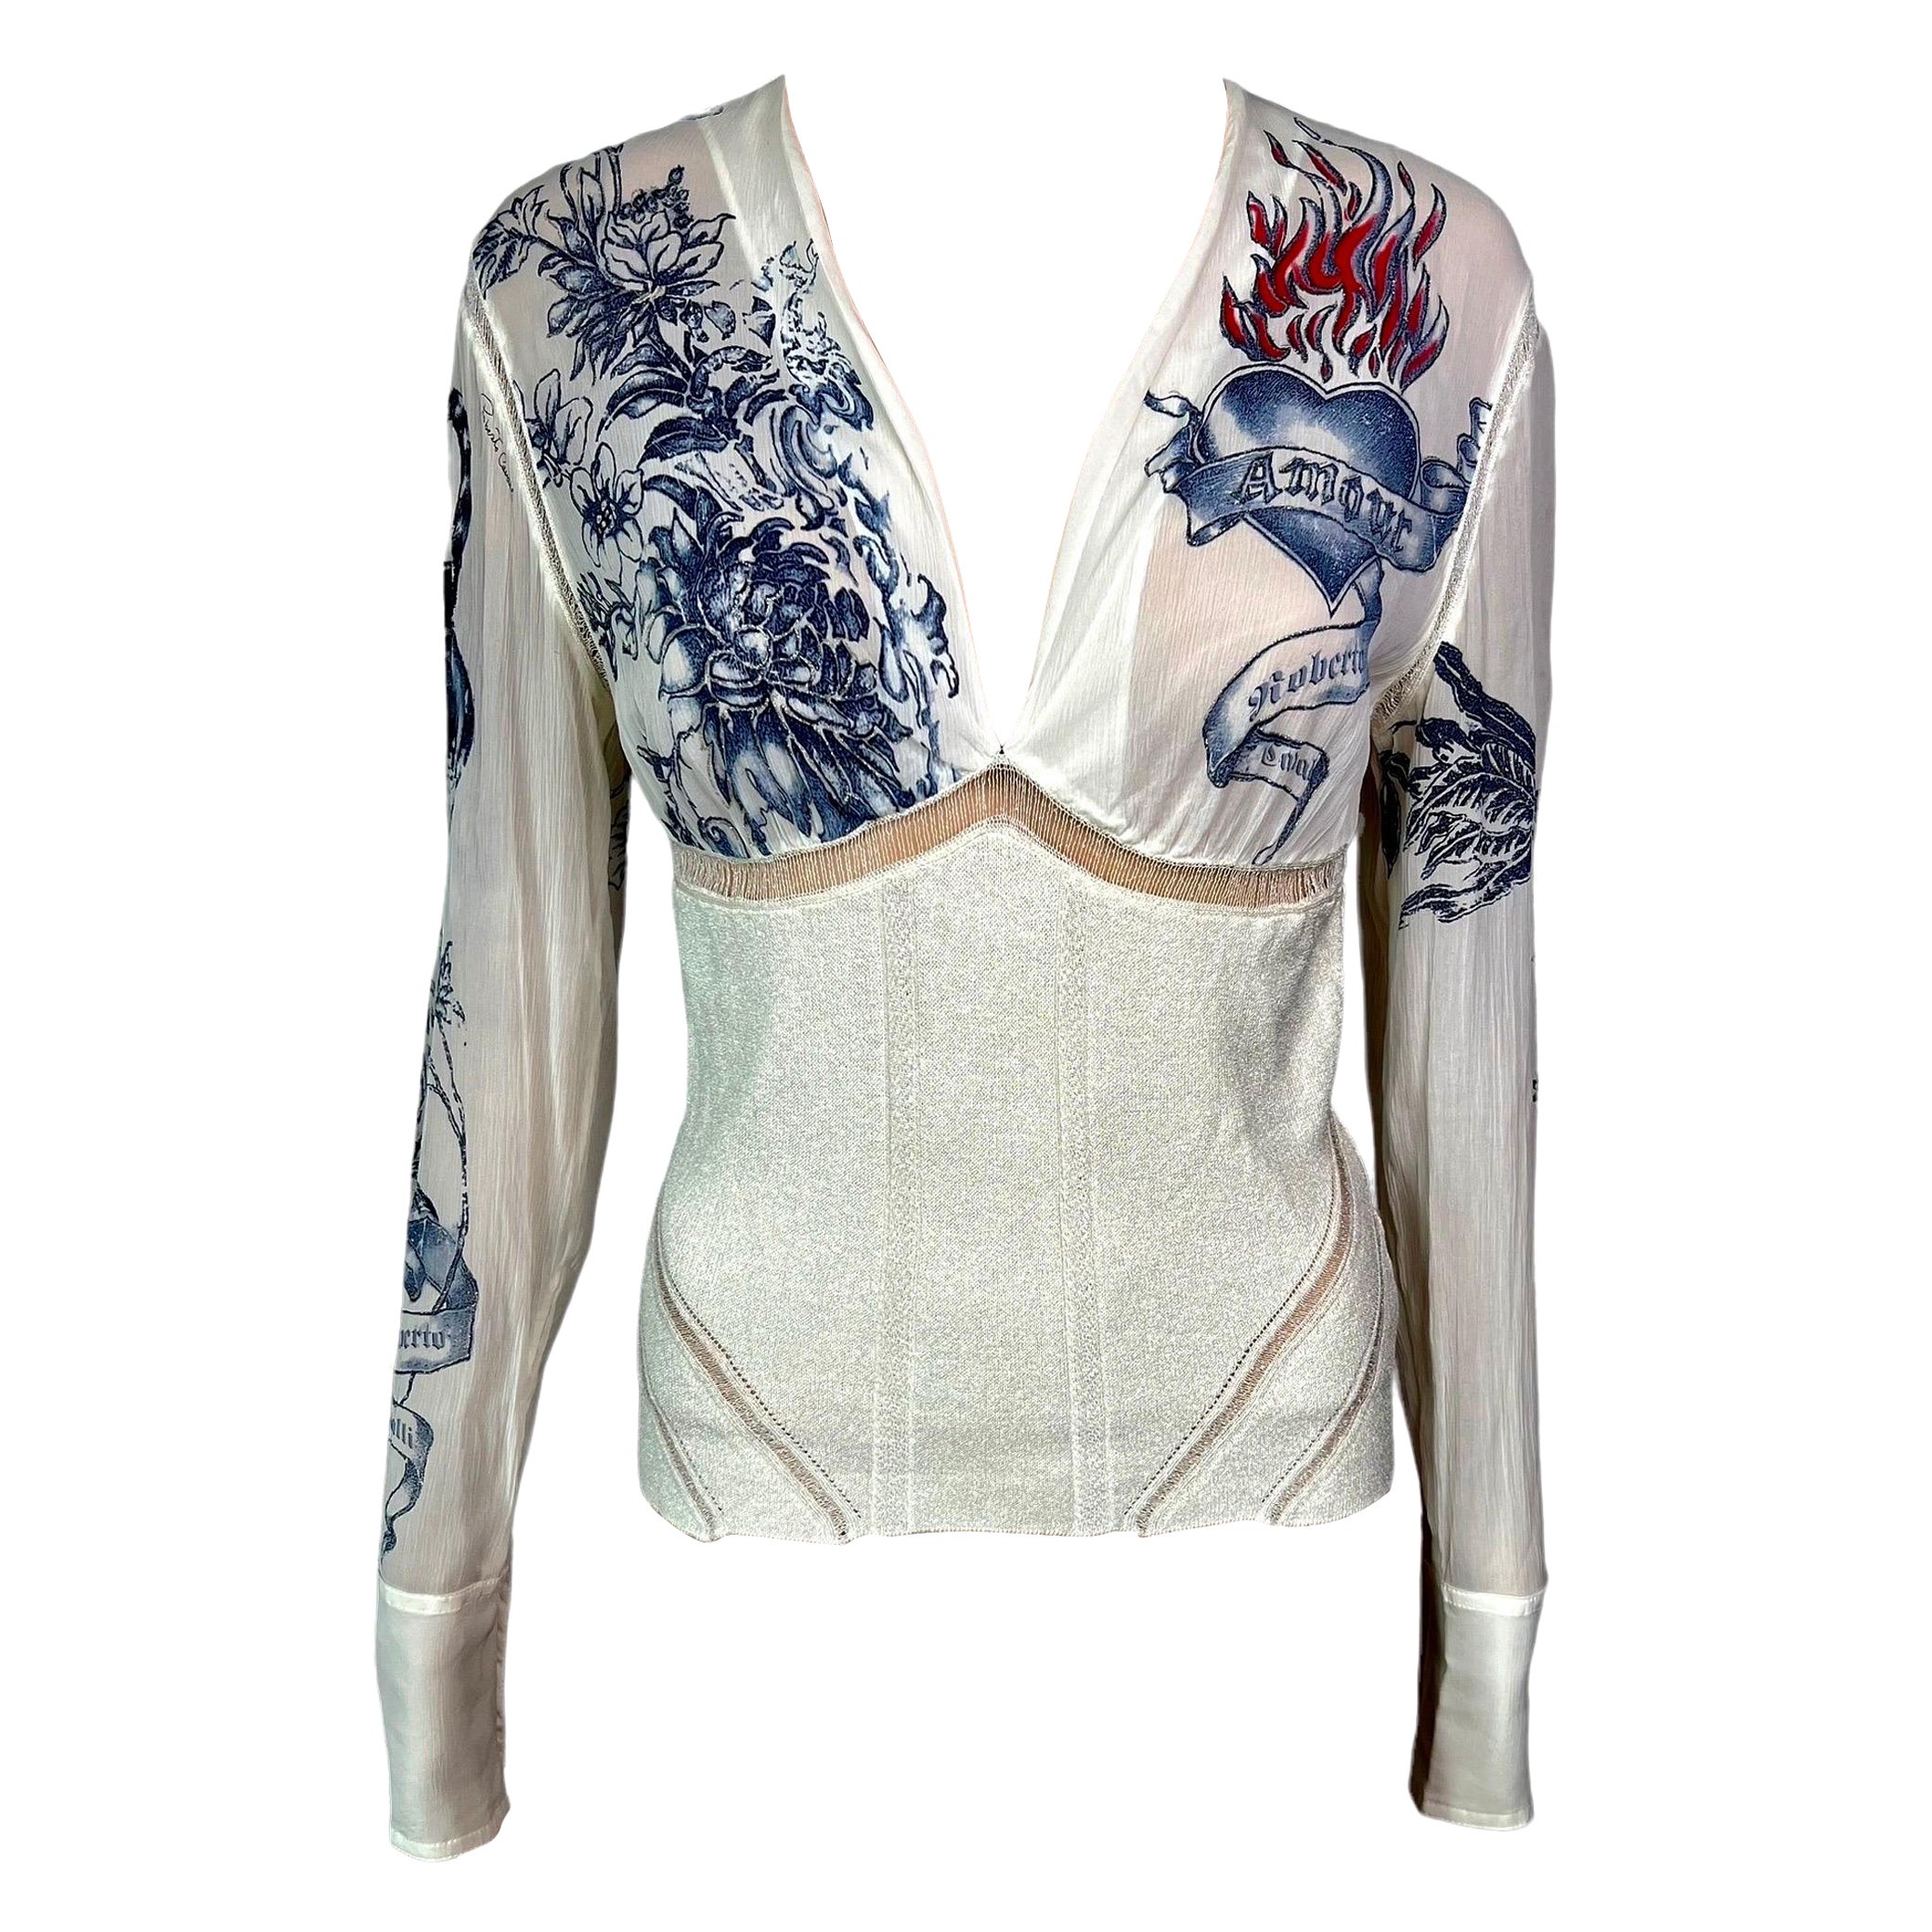 Roberto Cavalli S/S 2003 Tattoo Print Plunging Silk Knit Sheer Panels Blouse Top For Sale